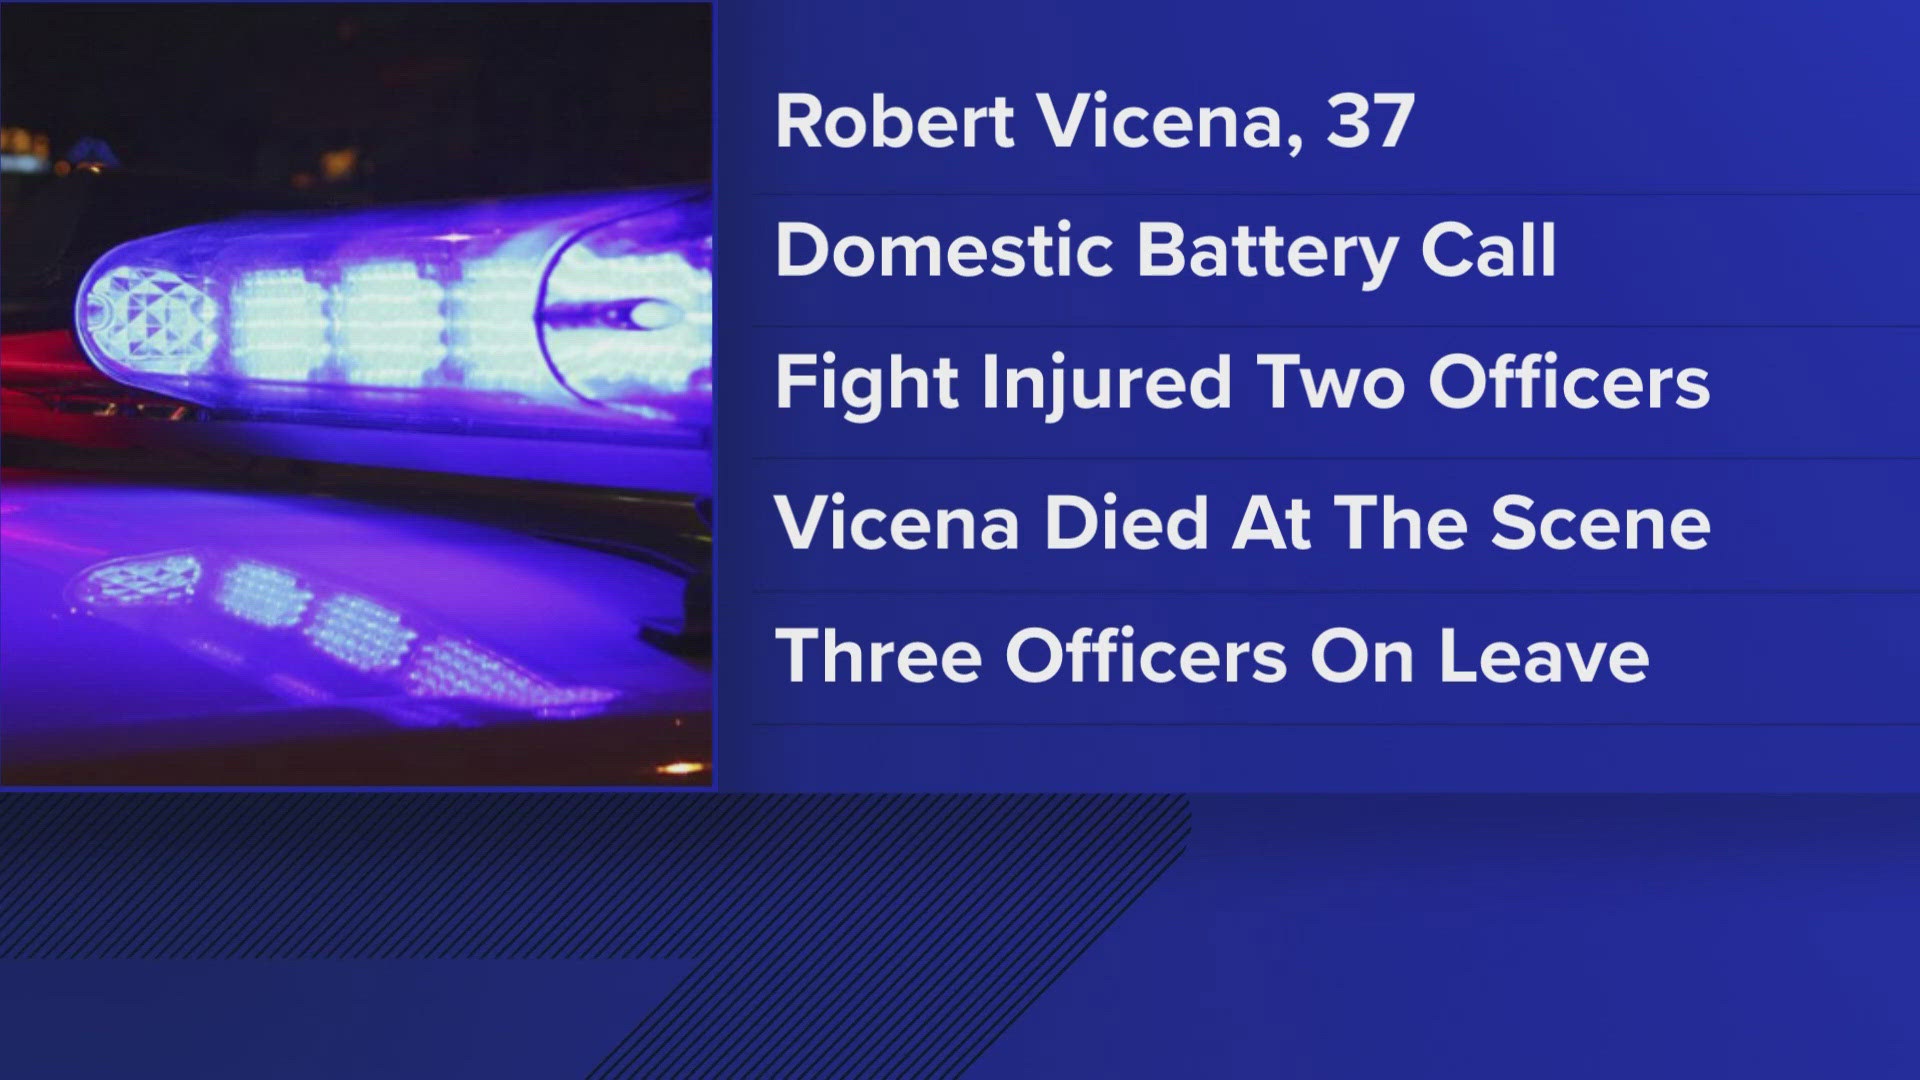 Robert A. Vicena, 37, of Fort Wayne was shot and killed after an alleged knife attack on two officers who were attempting to arrest him.